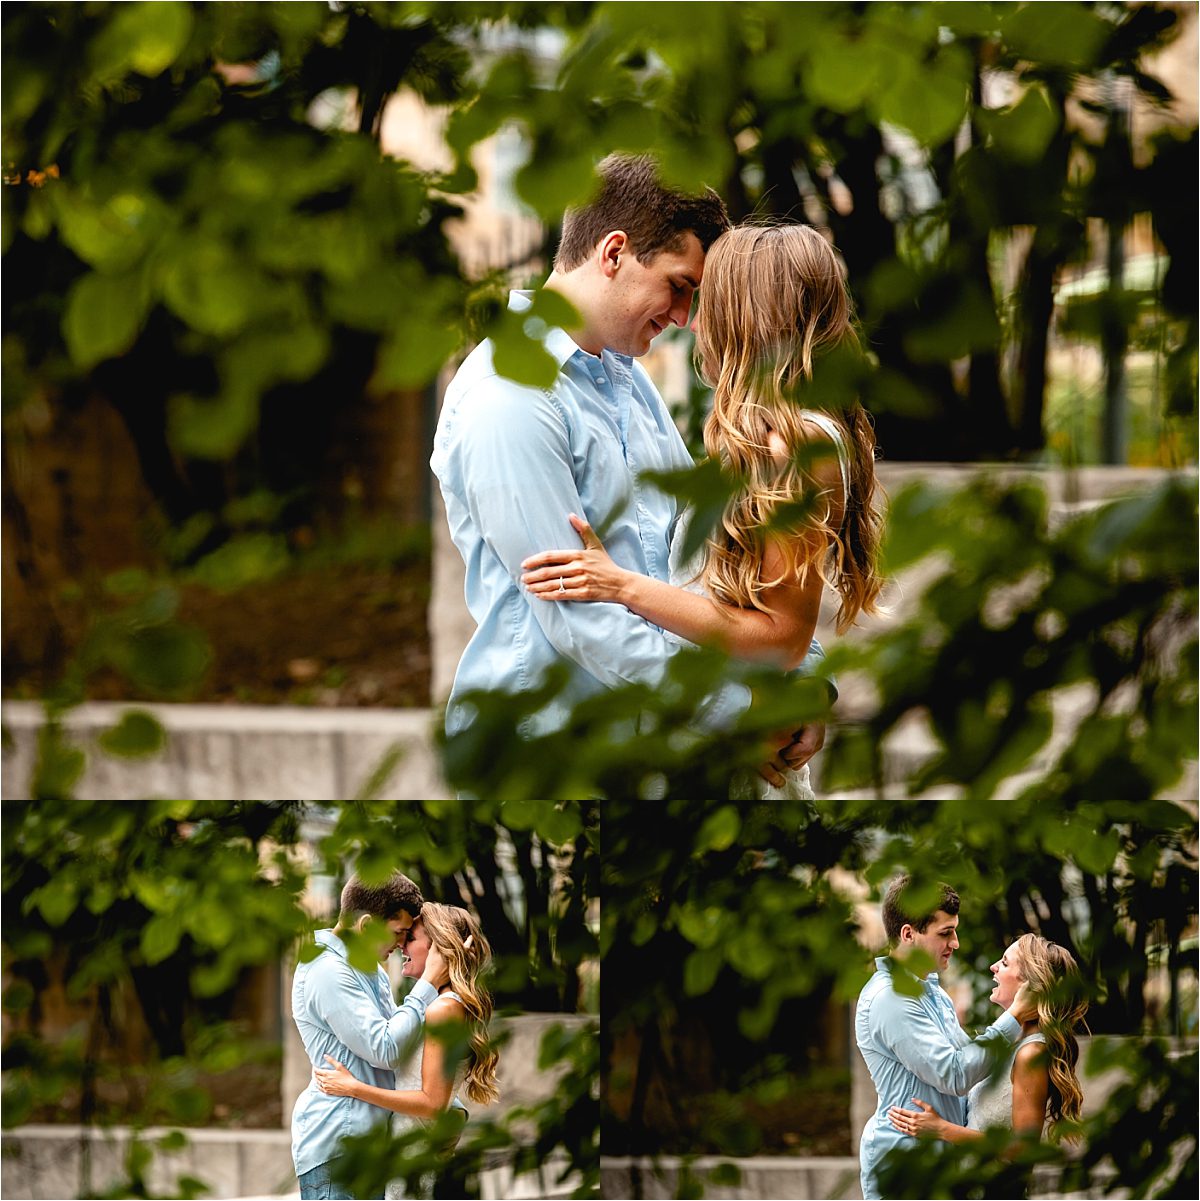 Indy Canal Walk engagement proposal - Wedding photographer Indianapolis - Roxana Snedeker